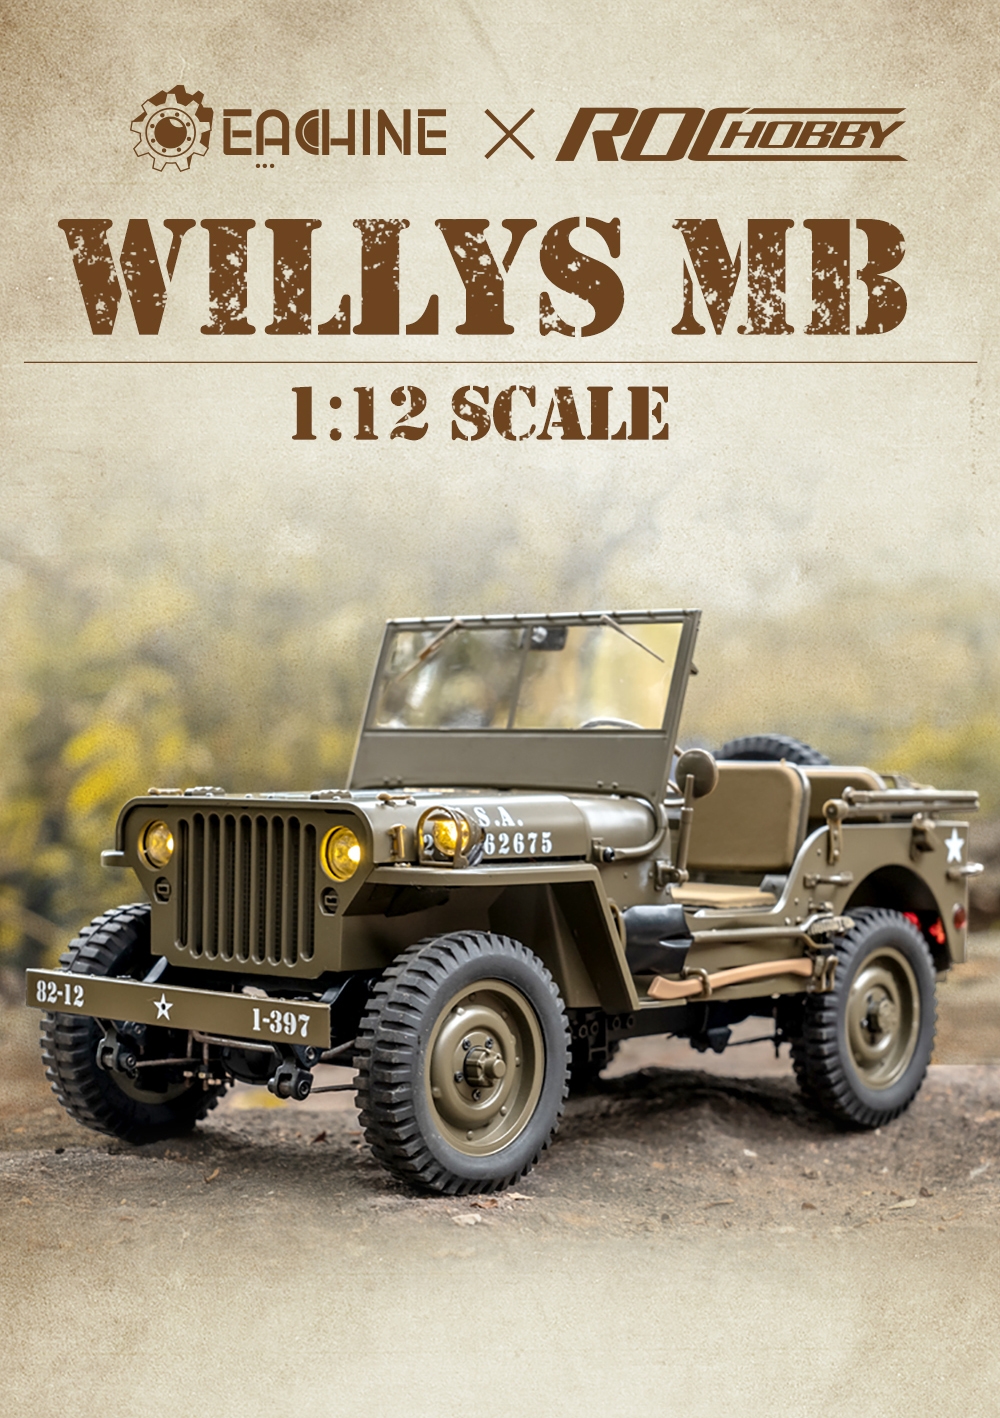 247.39 for Eachine Rochobby 1941 Willys MB 1/12 RC Car RC Off-Road Crawler RTR RC Army Truck with LED Lights 2-Speed Gearshift and Remote Control